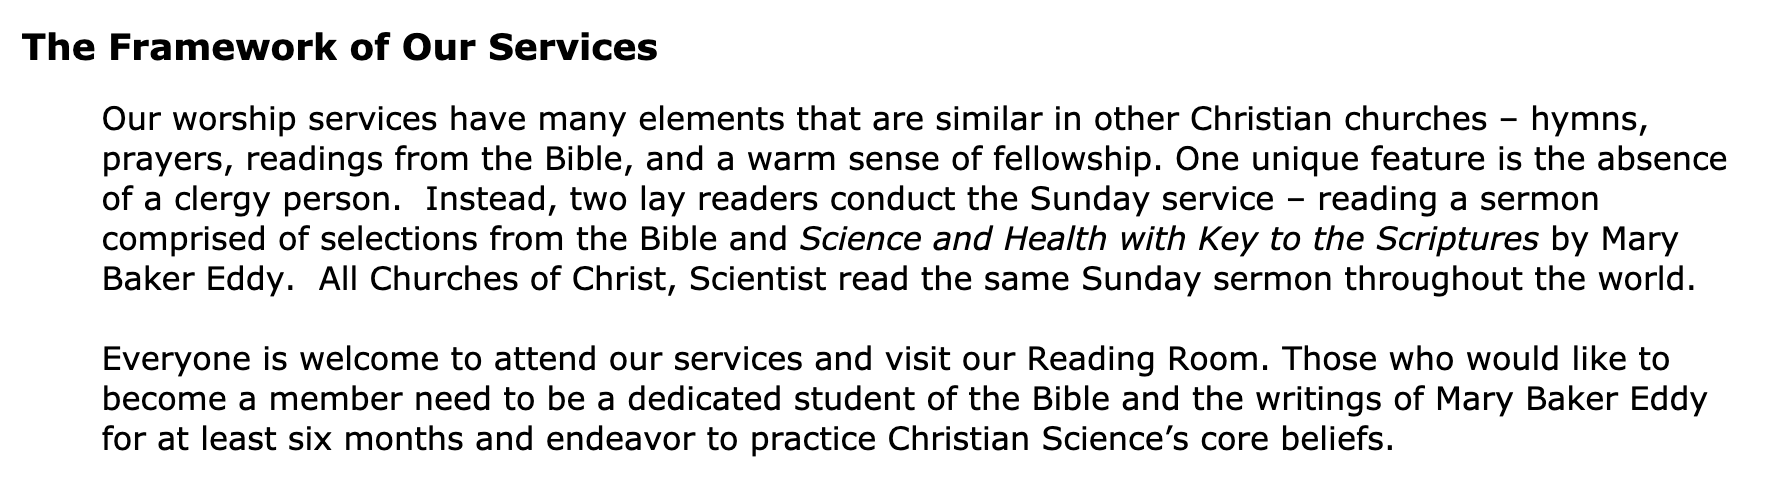 The First Church of Christ, Scientist, Naperville membership requirements